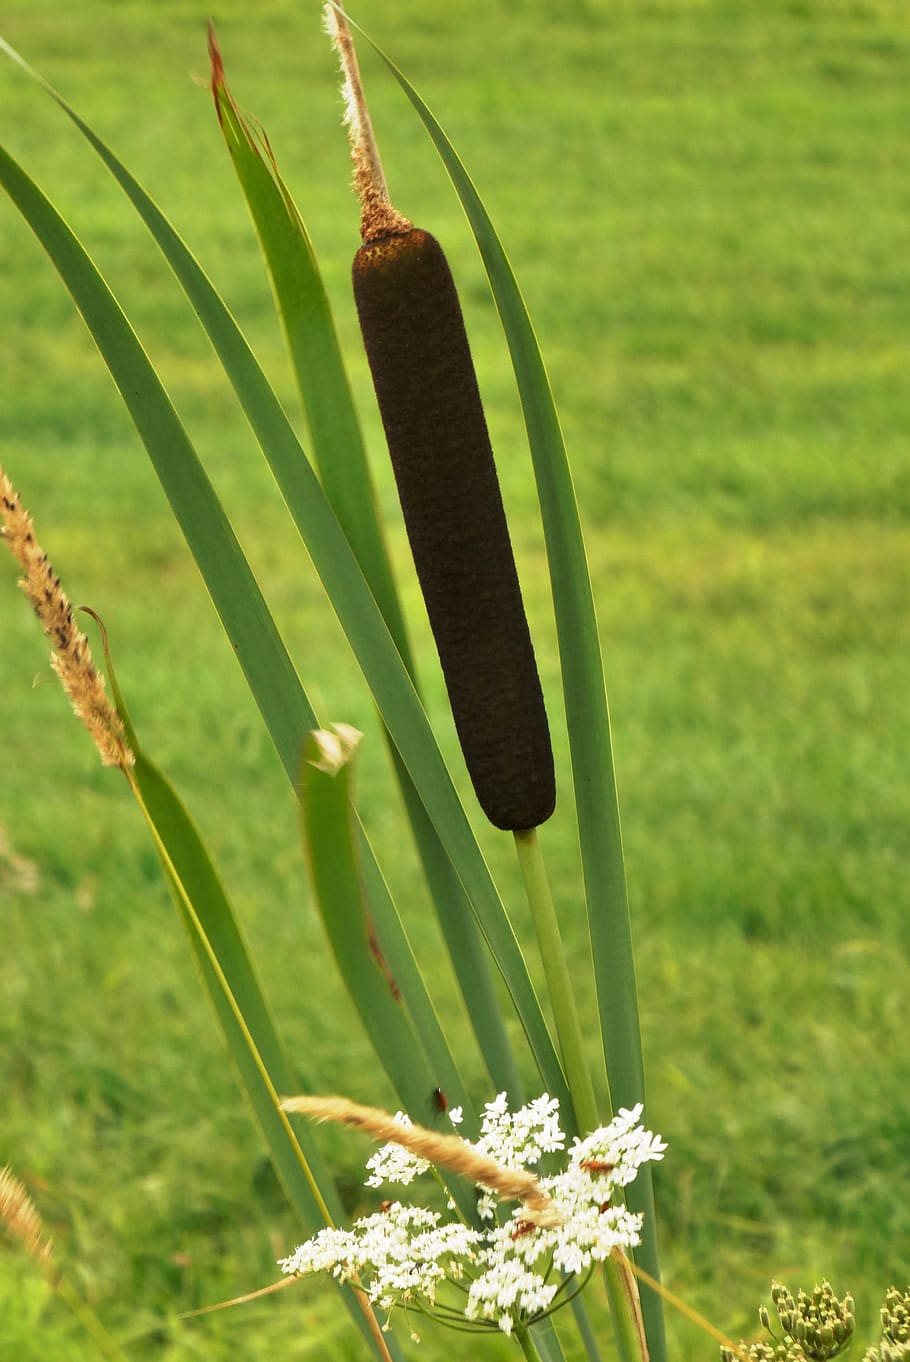 rietsigaar, cattail, typha latifolia, water plant, brown, summer, ditch, plant, growth, green color